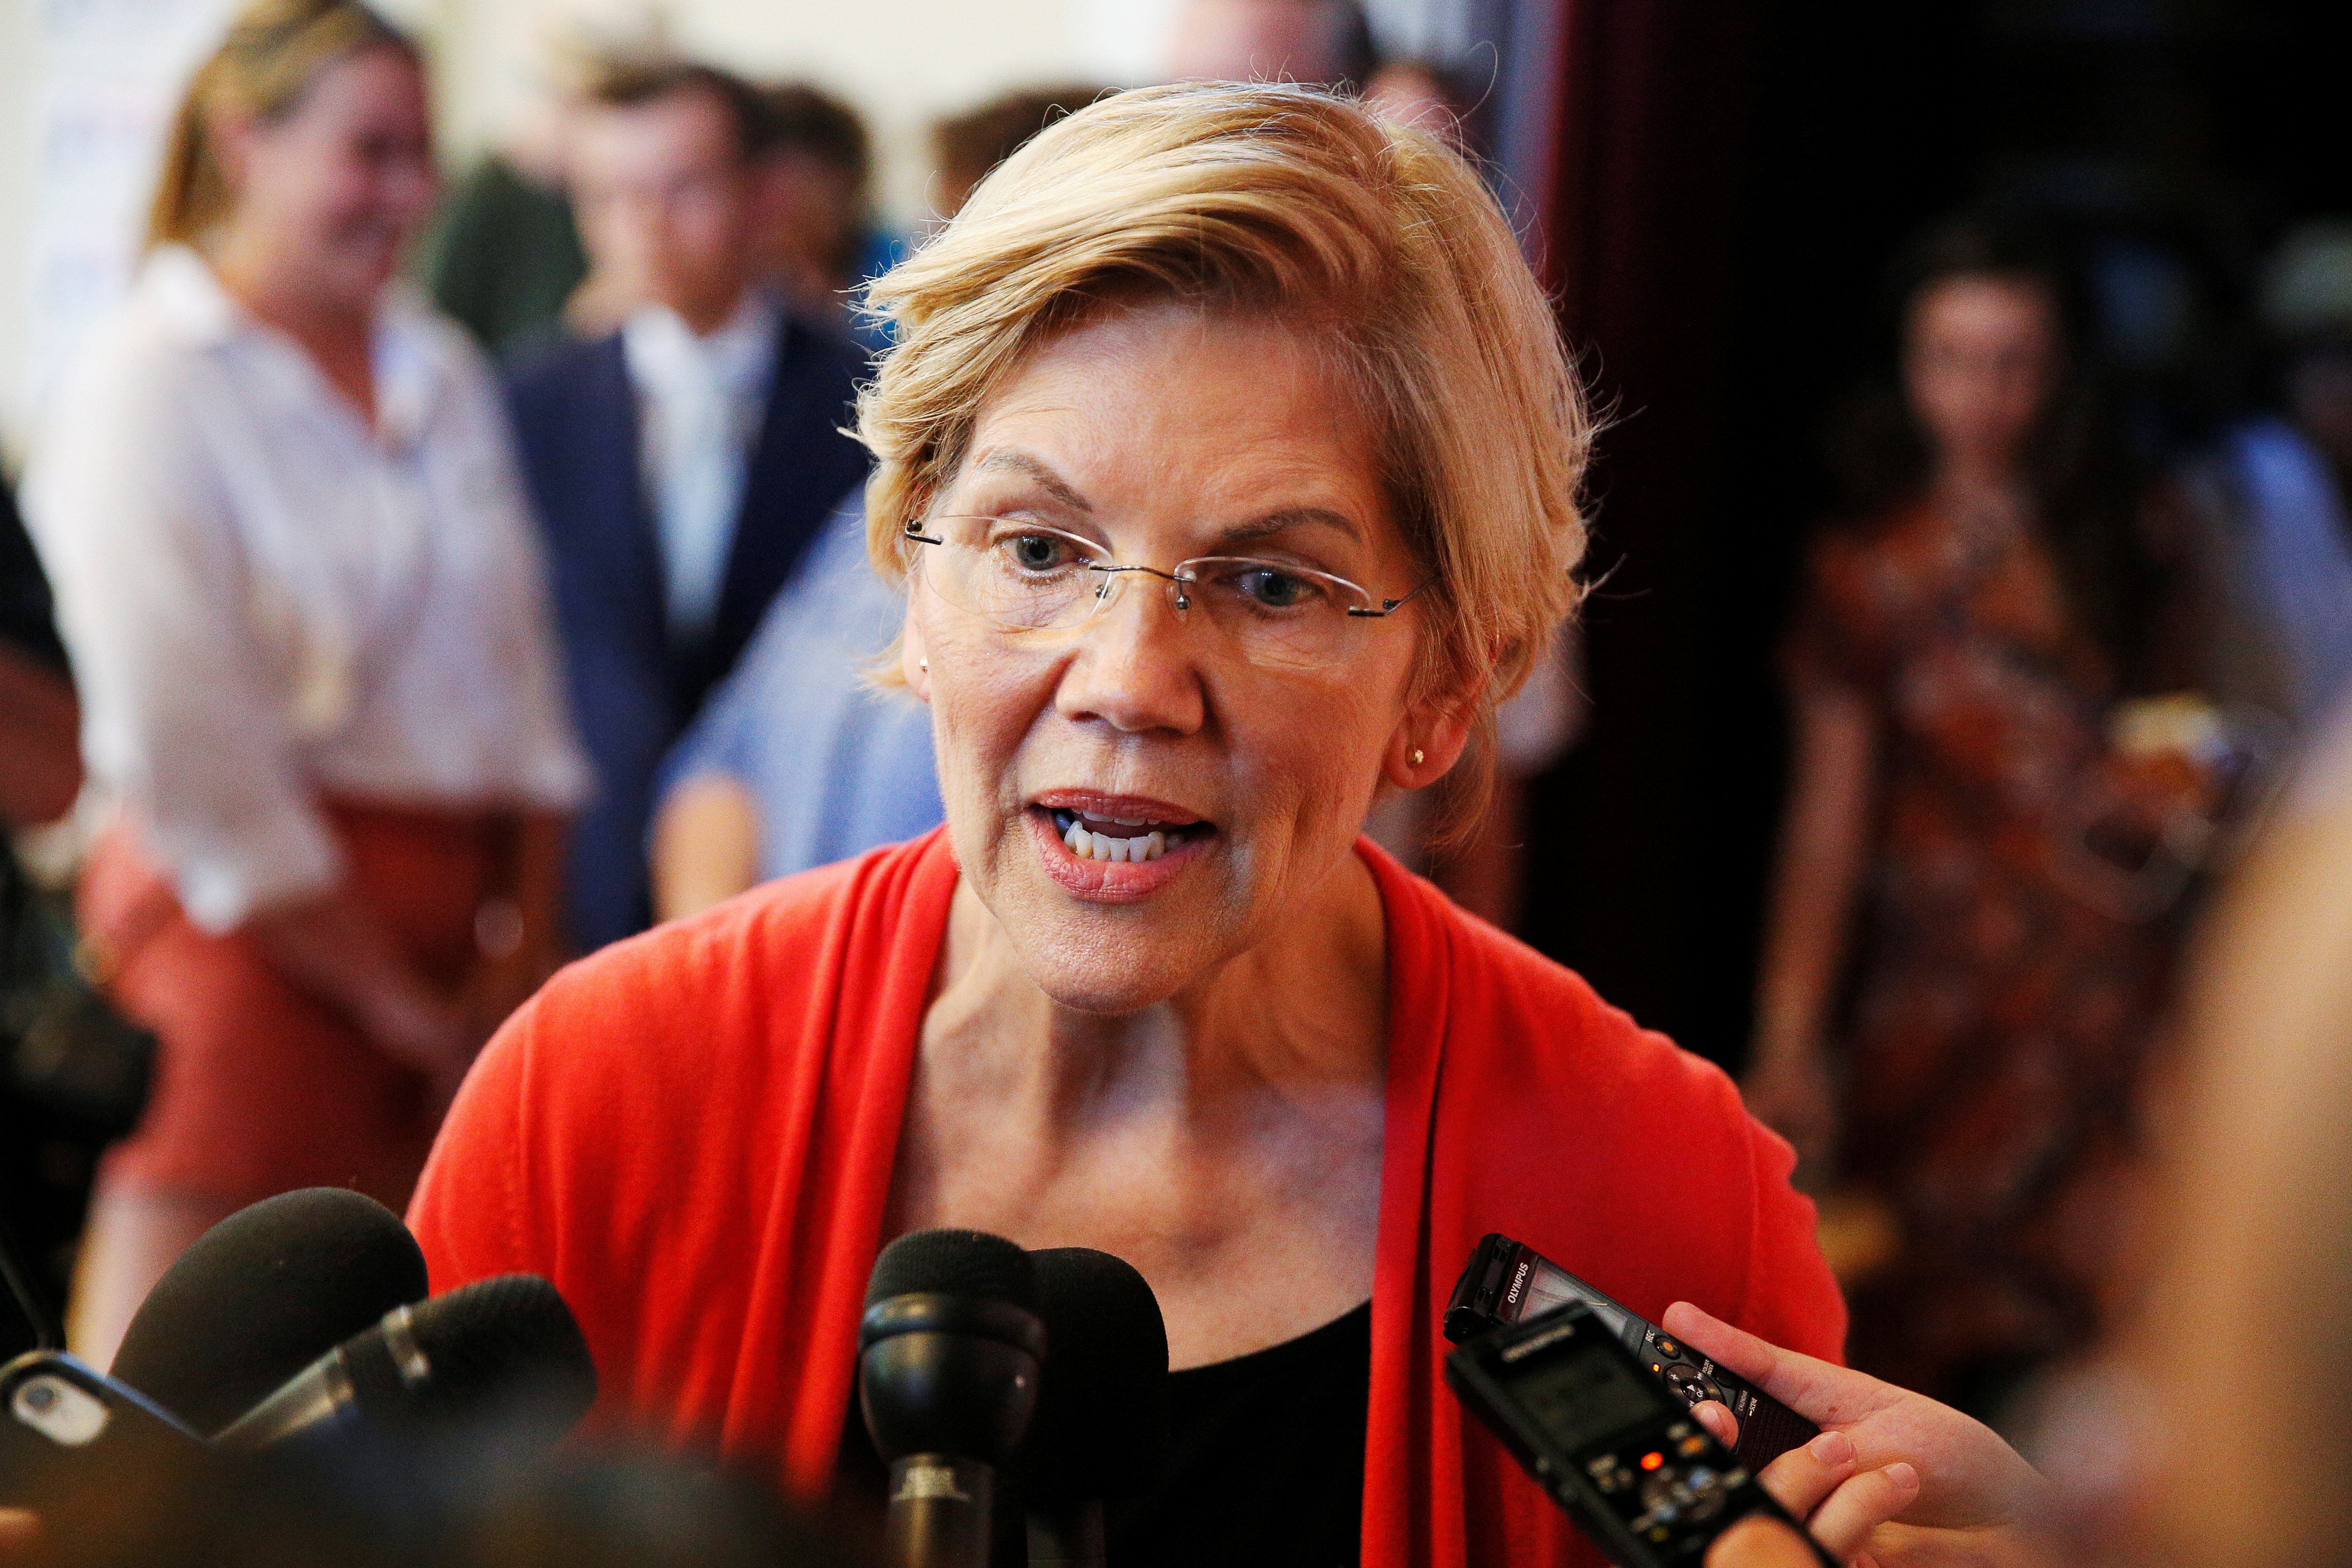 Democratic 2020 U.S. presidential candidate Sen. Elizabeth Warren speaks to members of the media during a town hall at the Peterborough Town House in Peterborough, New Hampshire